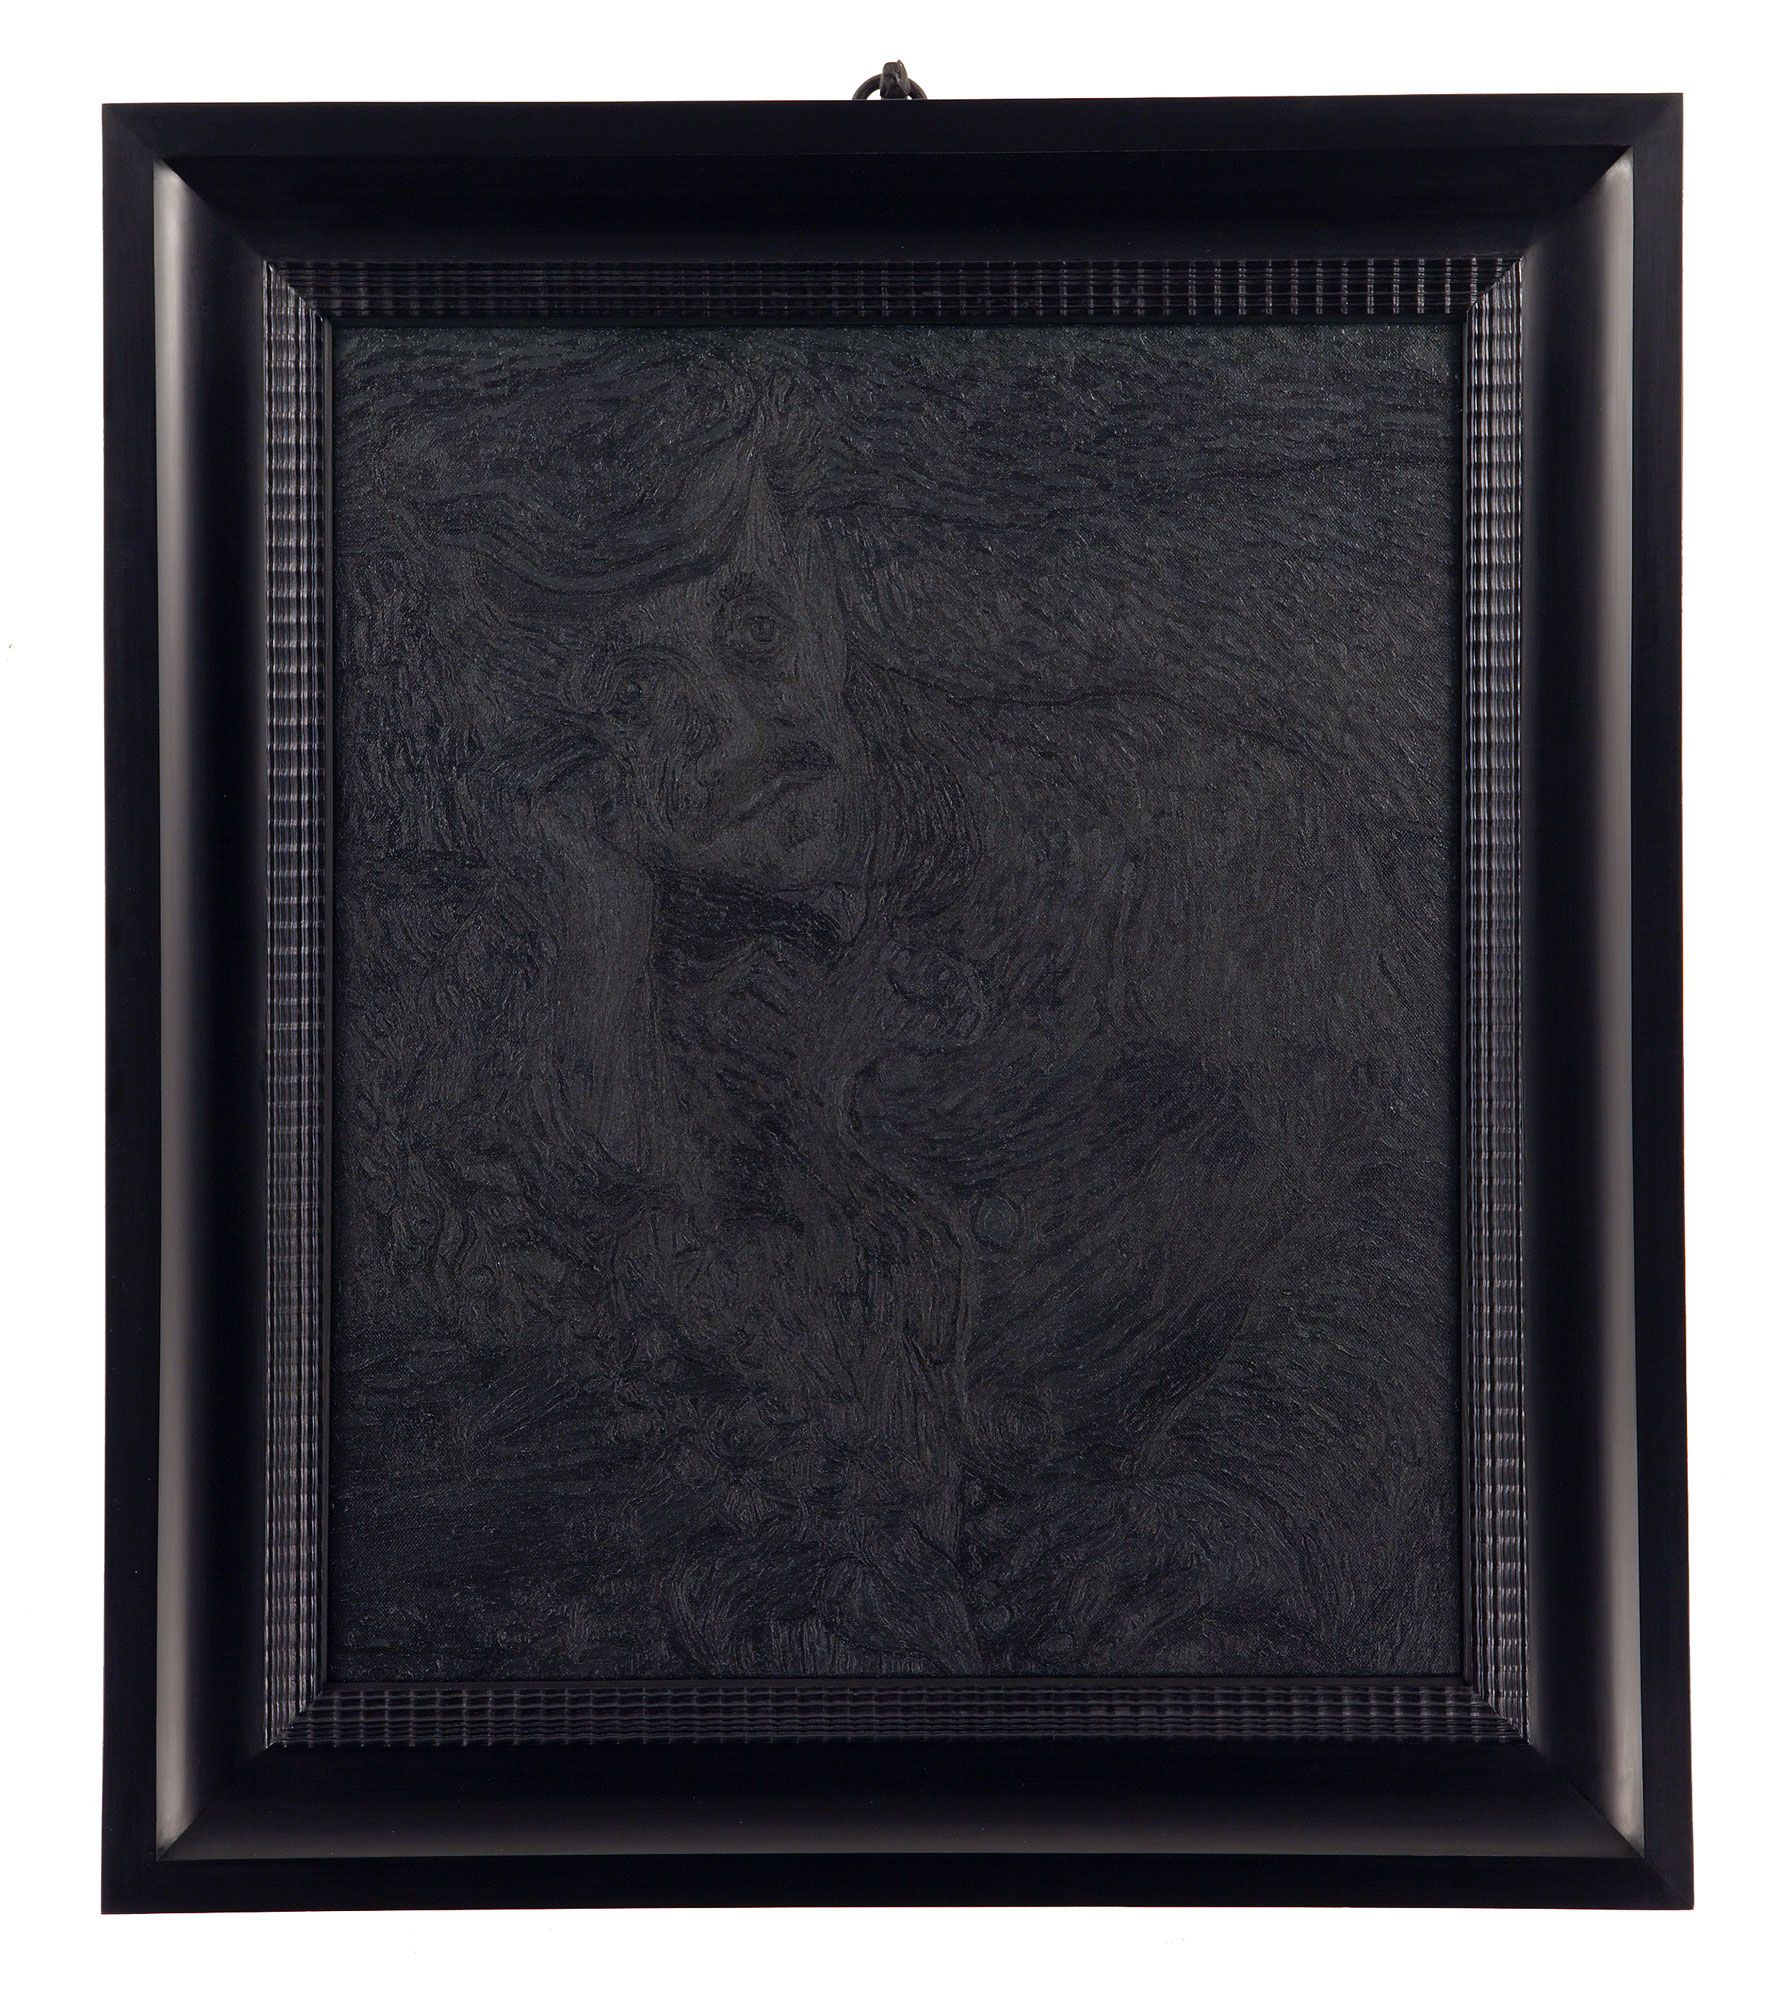 A soulful reinvention of Van Gogh's Dr Gachet painting in black oil paint by Mark Alexander - Version XII.